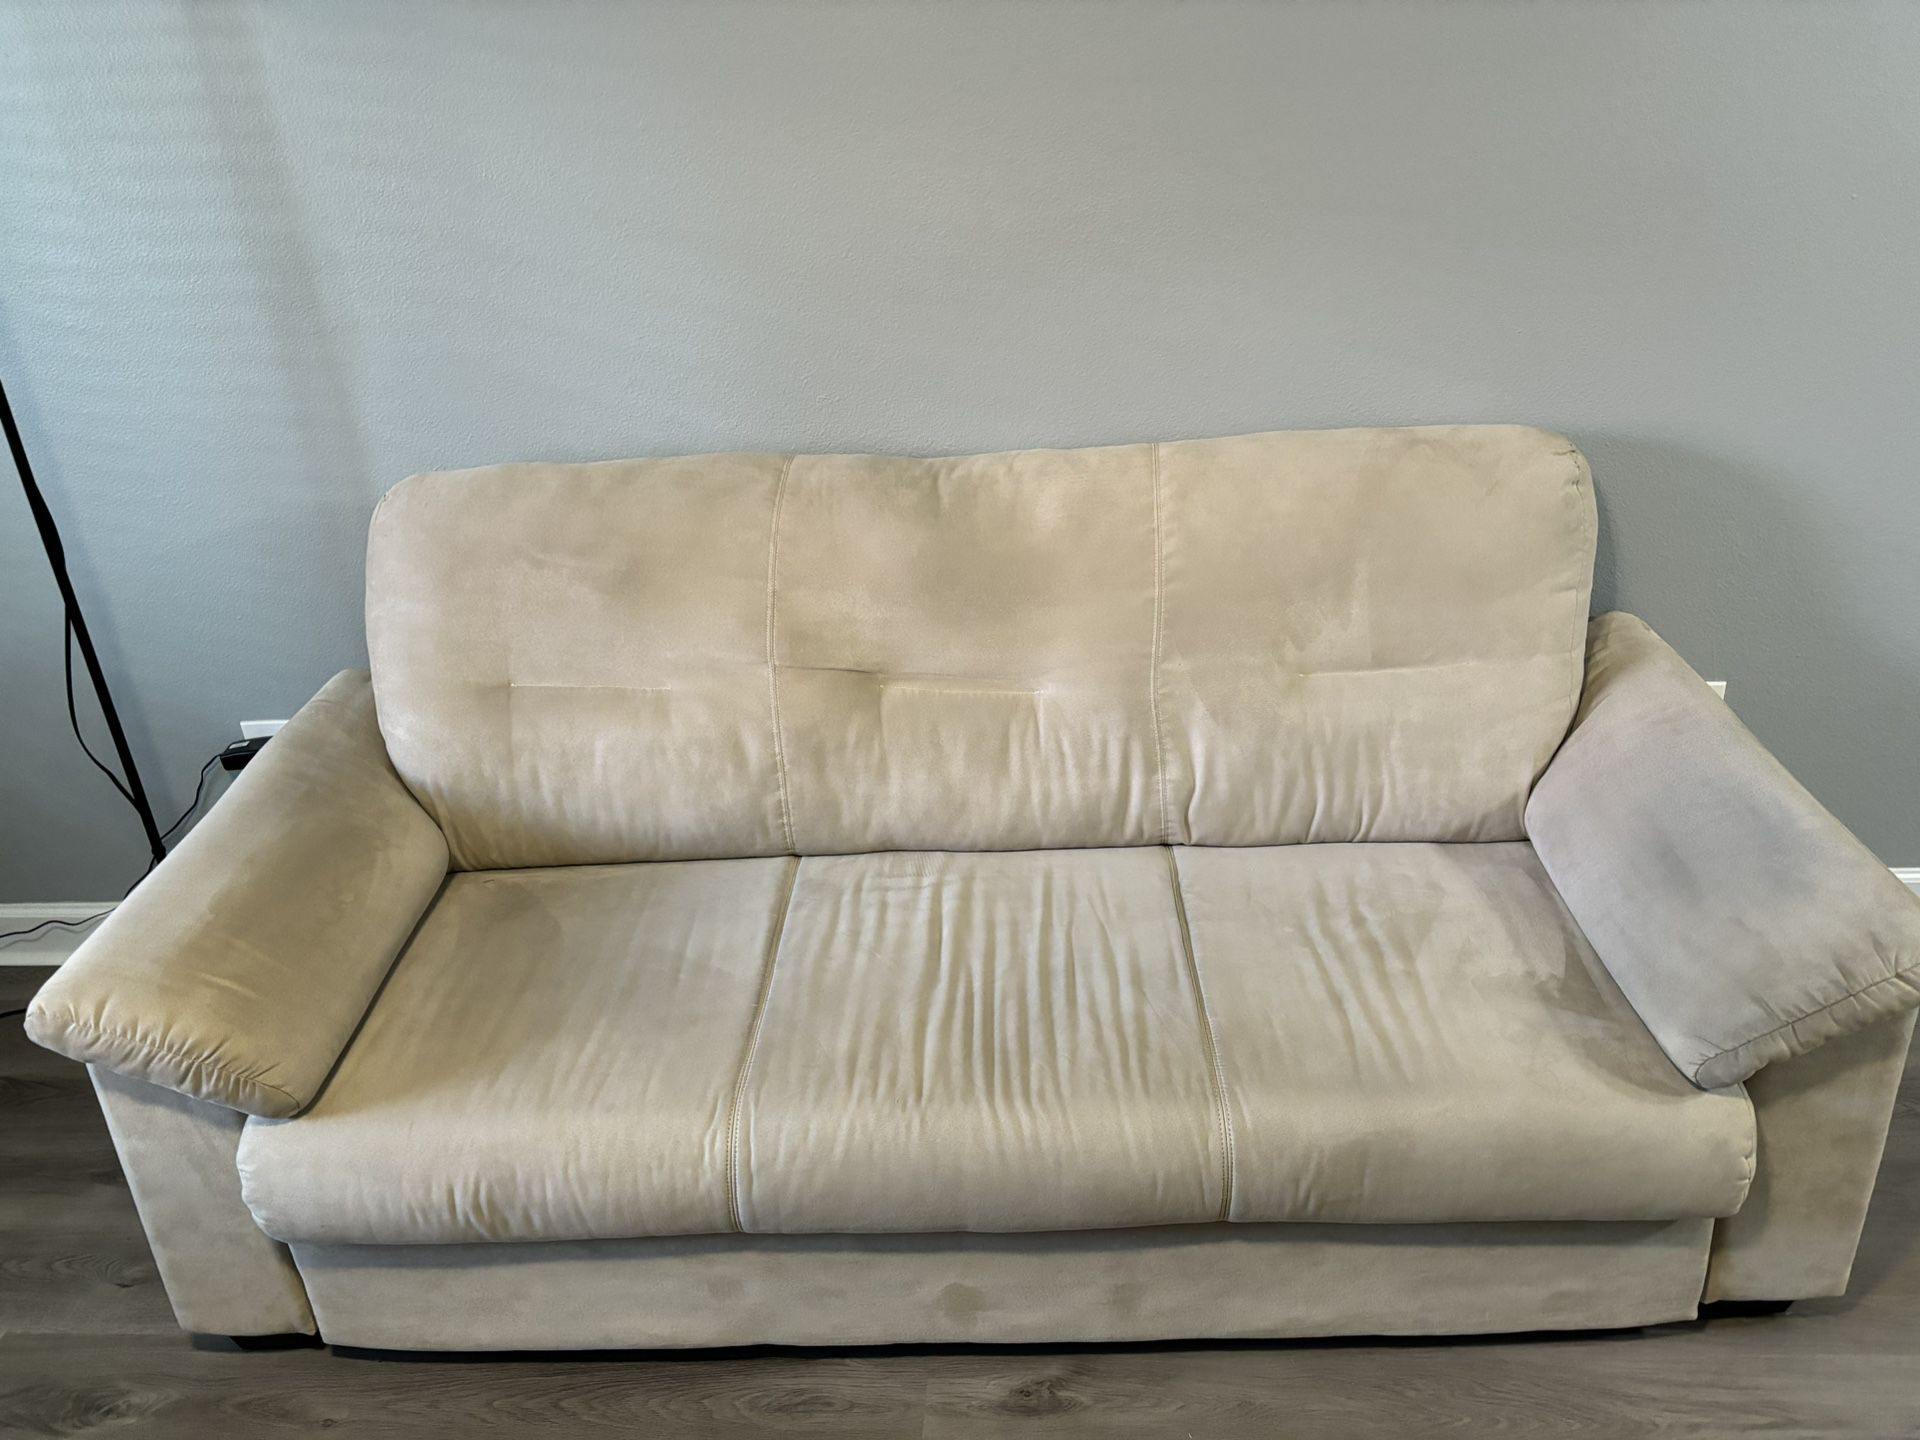 Sofa / Couch FREE